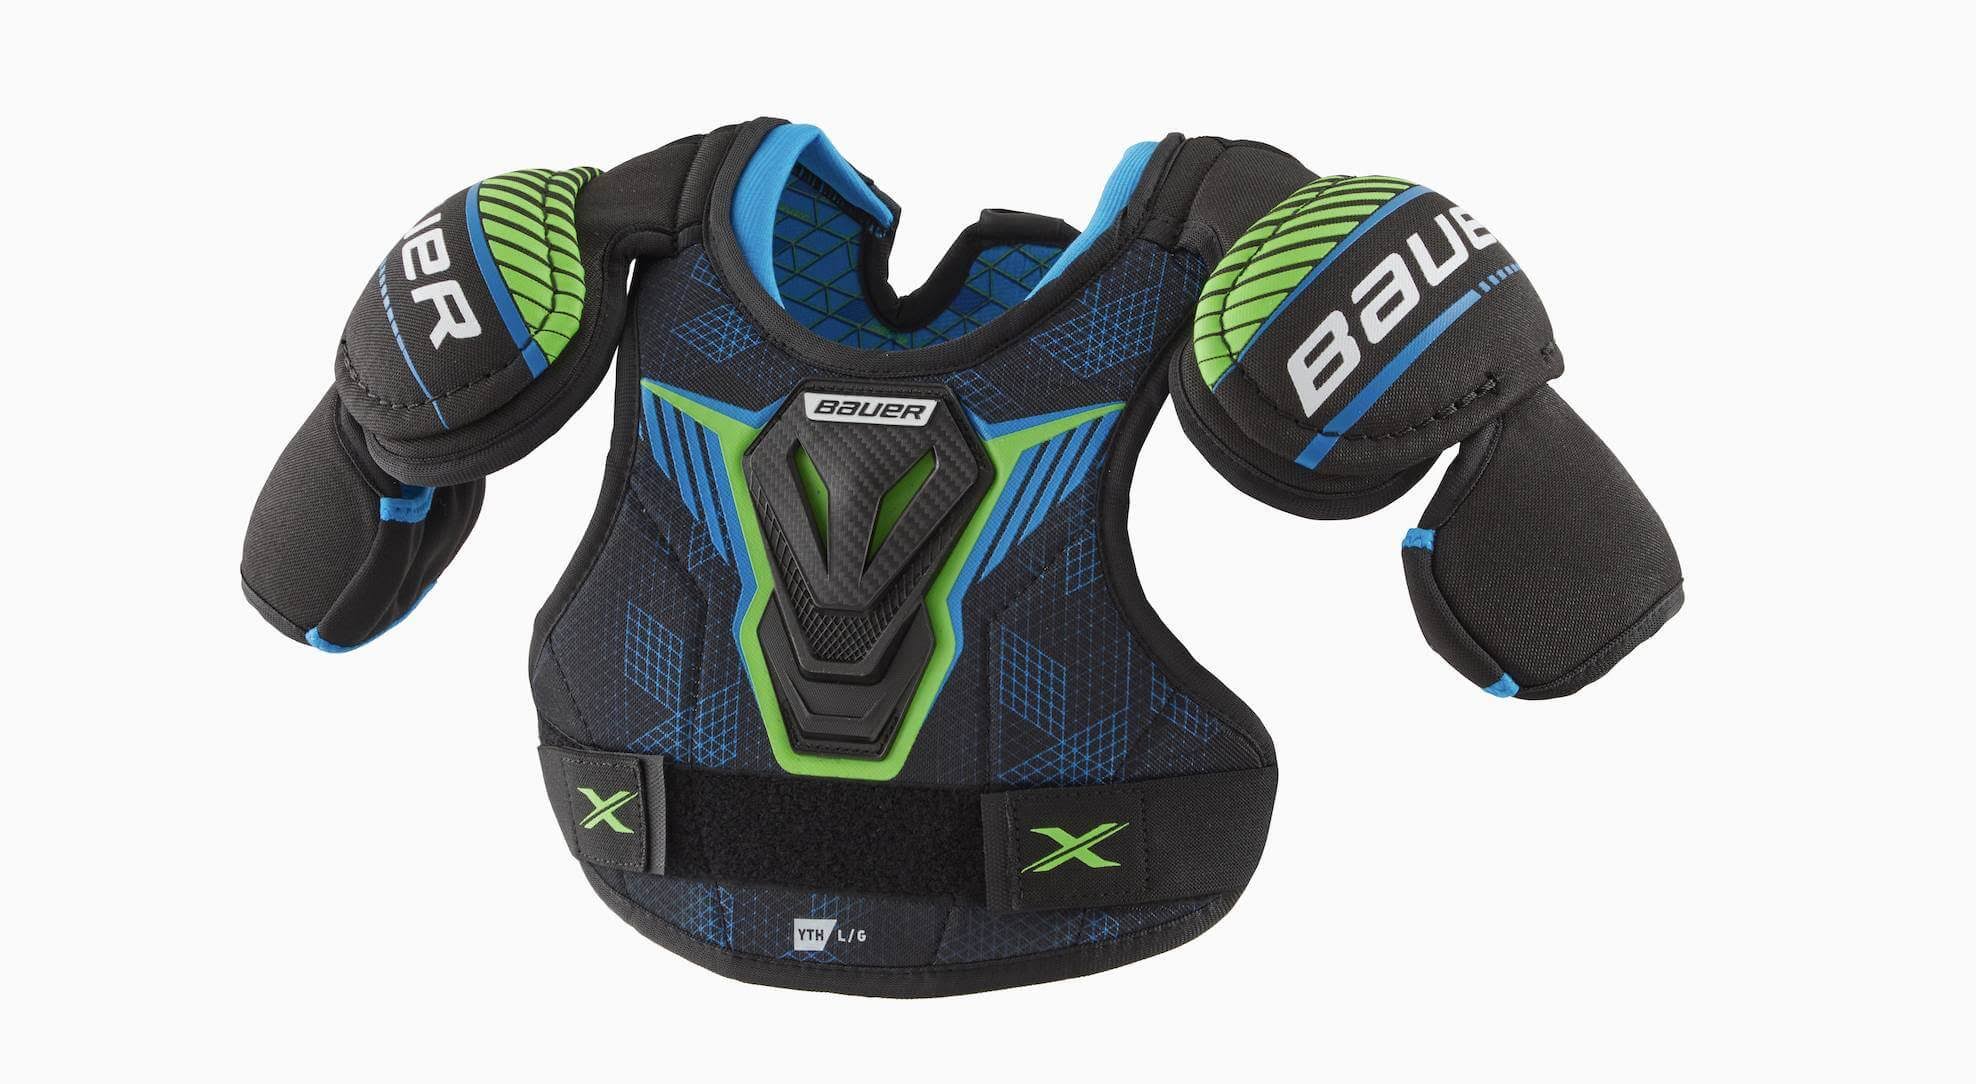 Bauer S21 x Shoulder Pads - Youth, Large